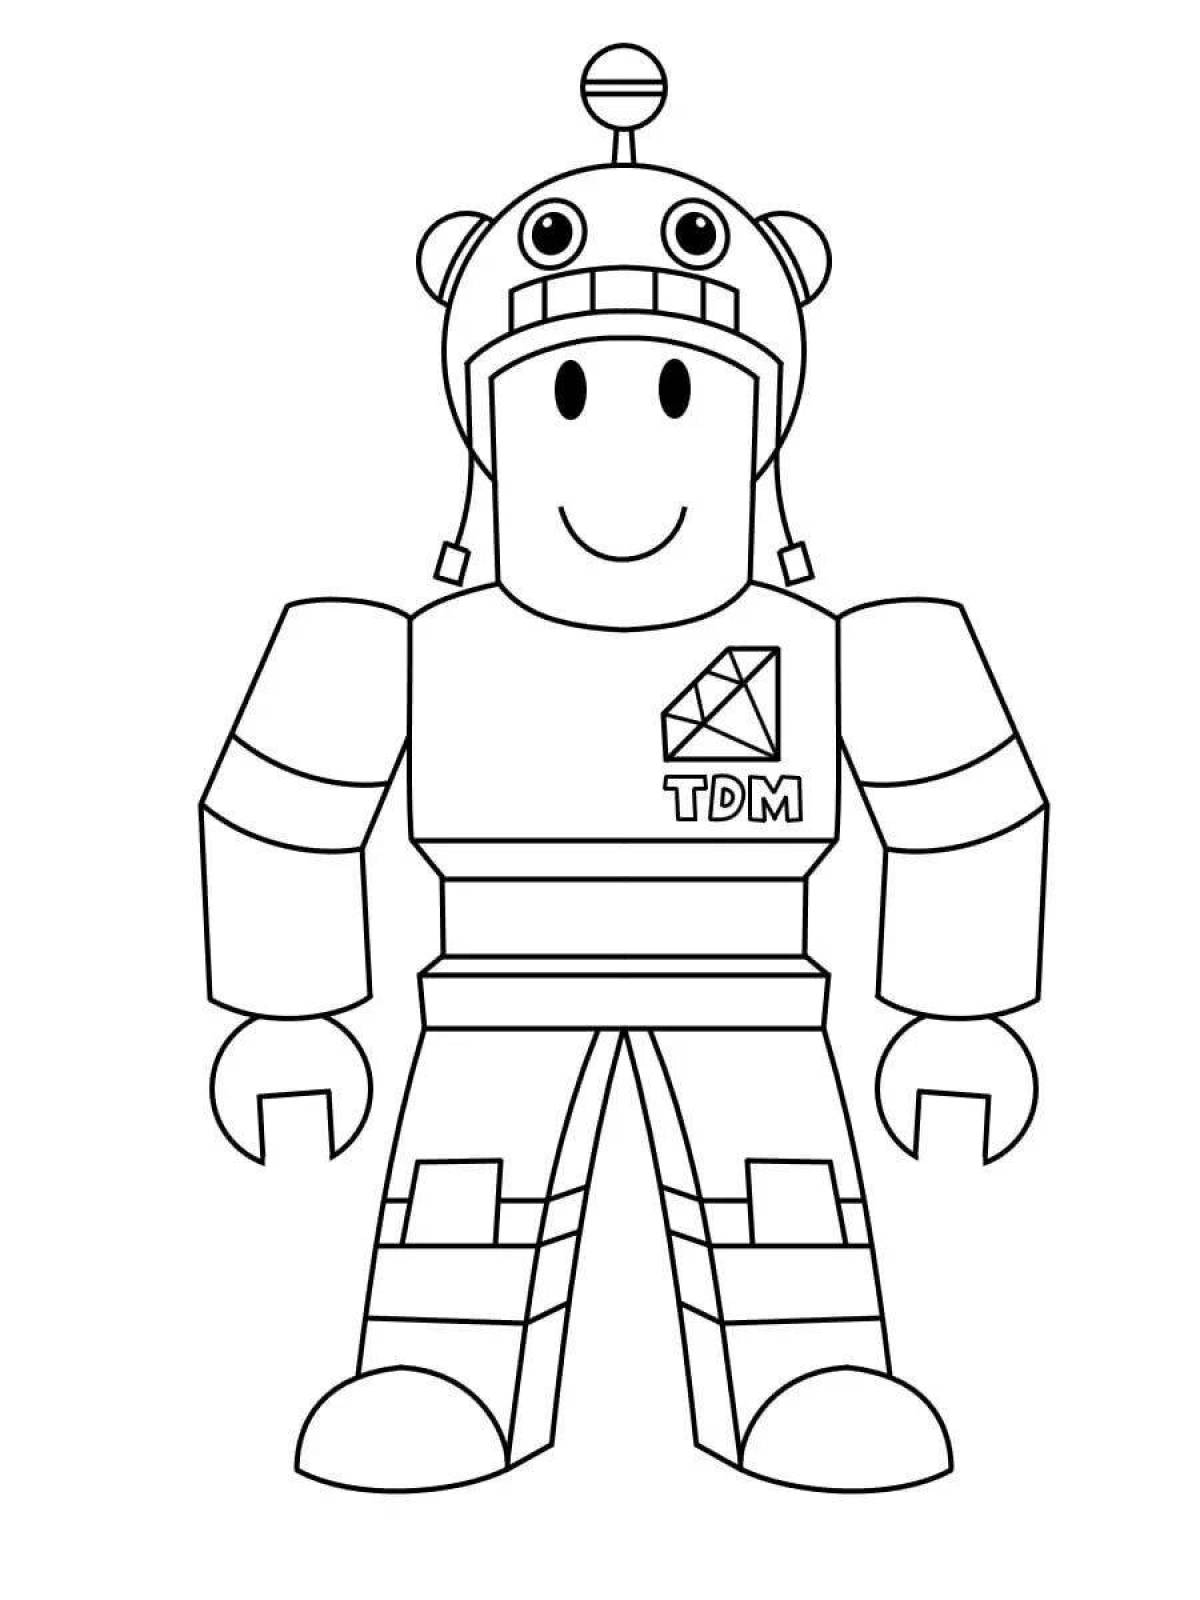 Exciting roblox character coloring pages